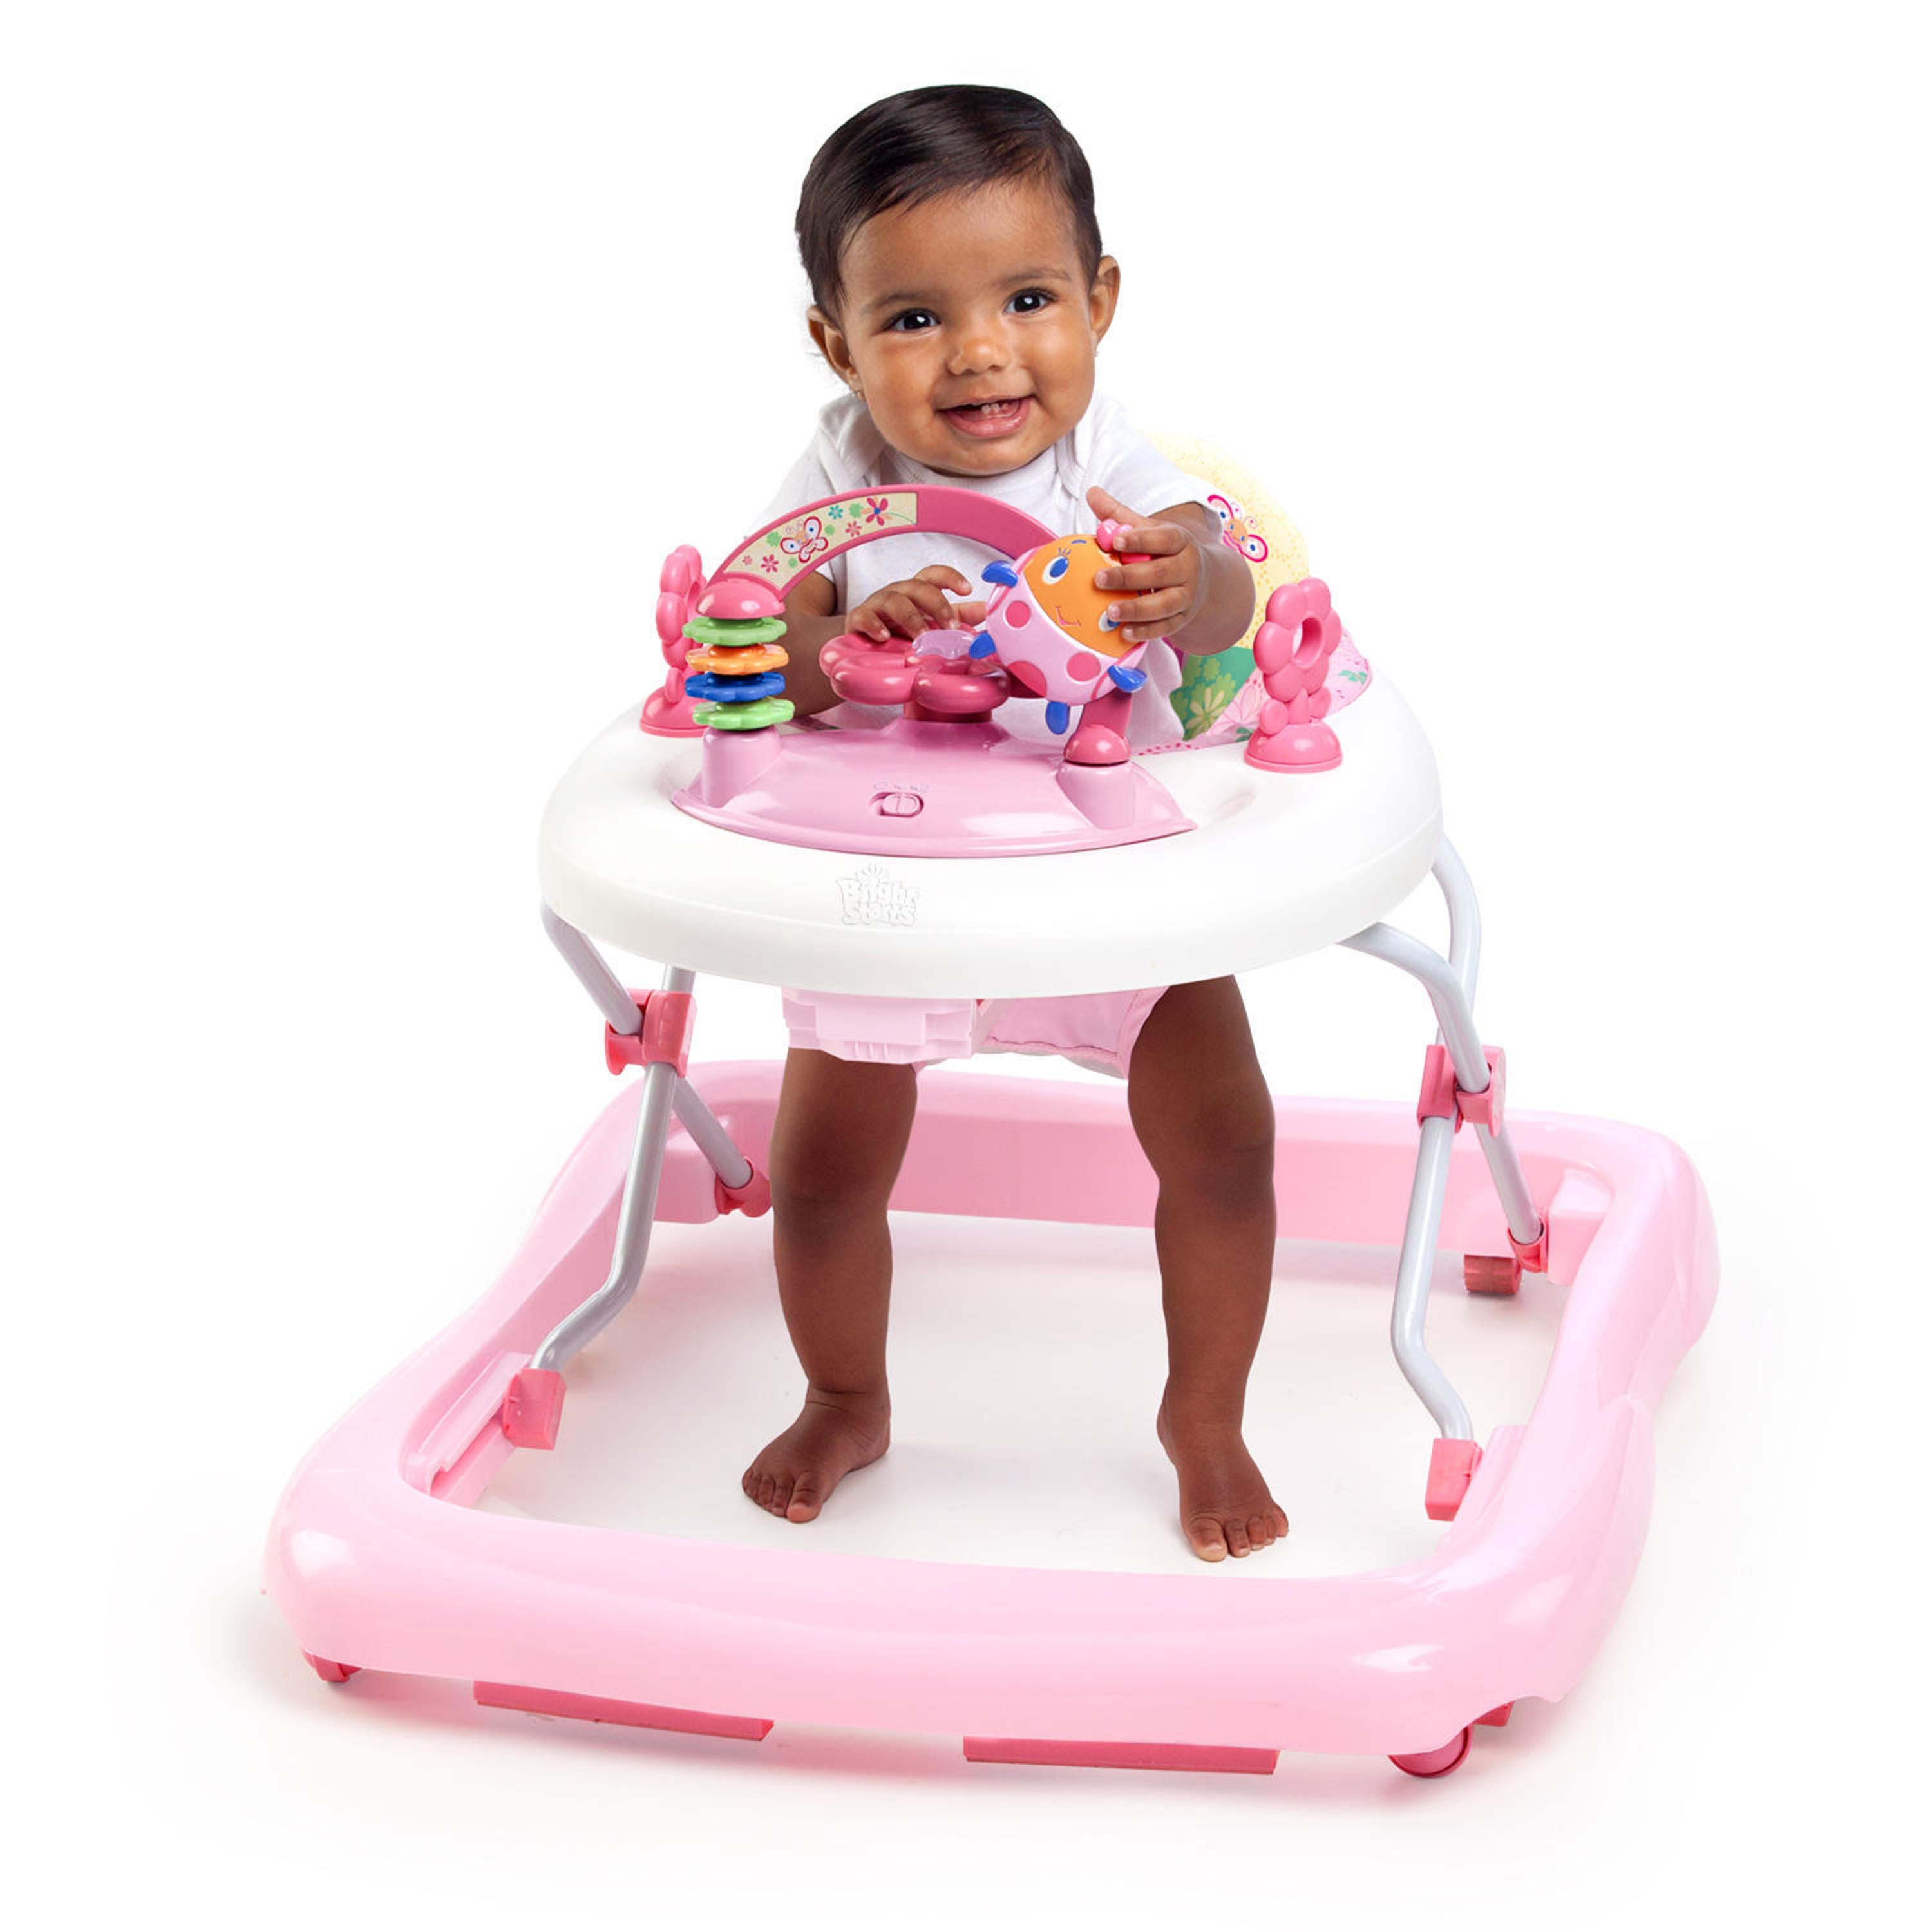 Bright Starts Giggling Safari Walker with Easy Fold Frame for Storage, Ages  6 Months +